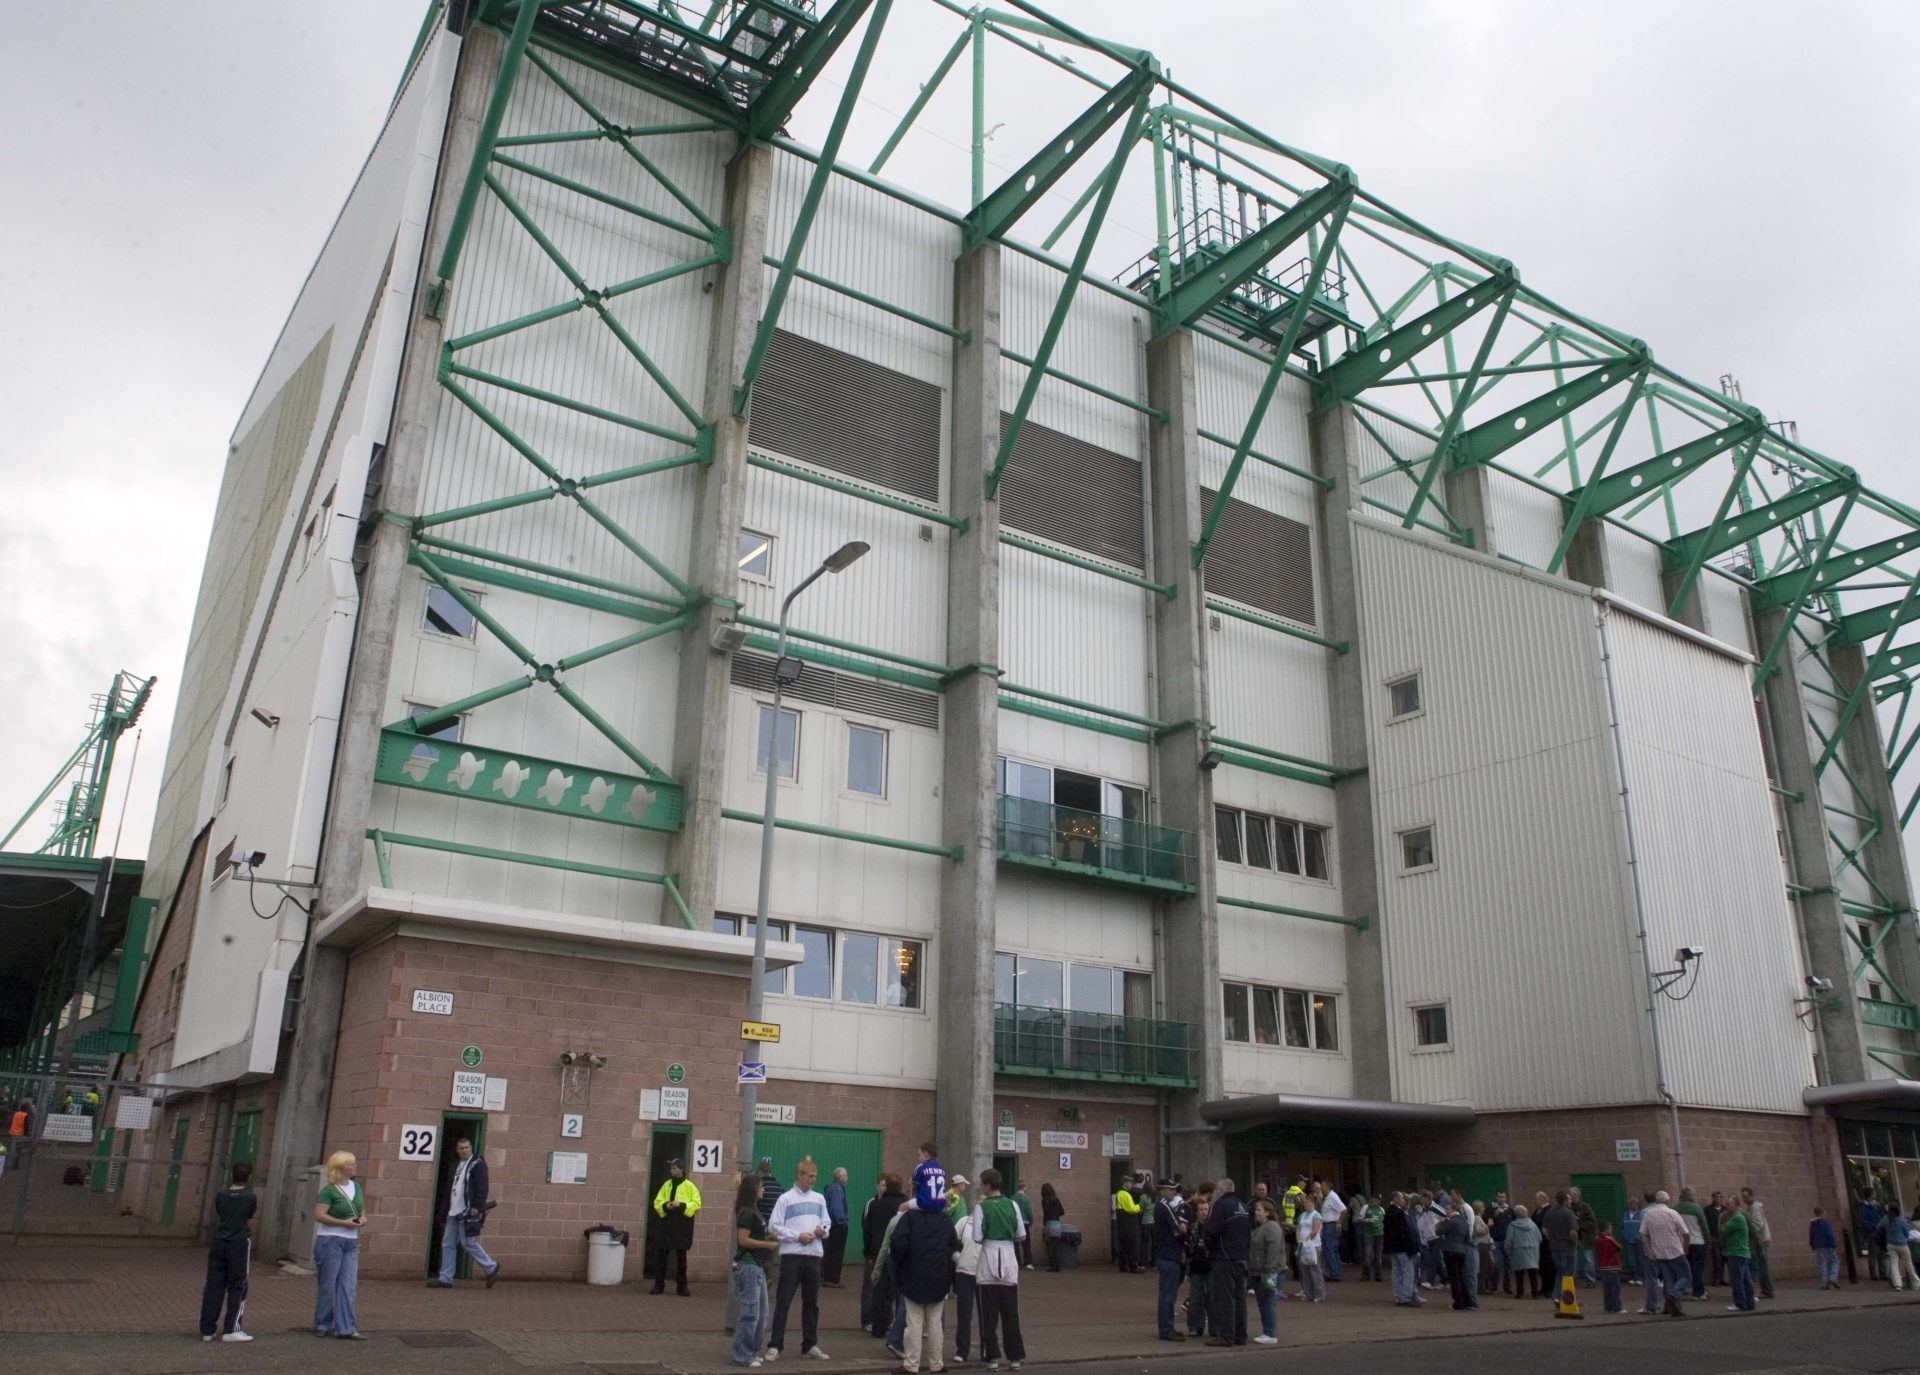 Hibernian given green light over investment after SFA approval